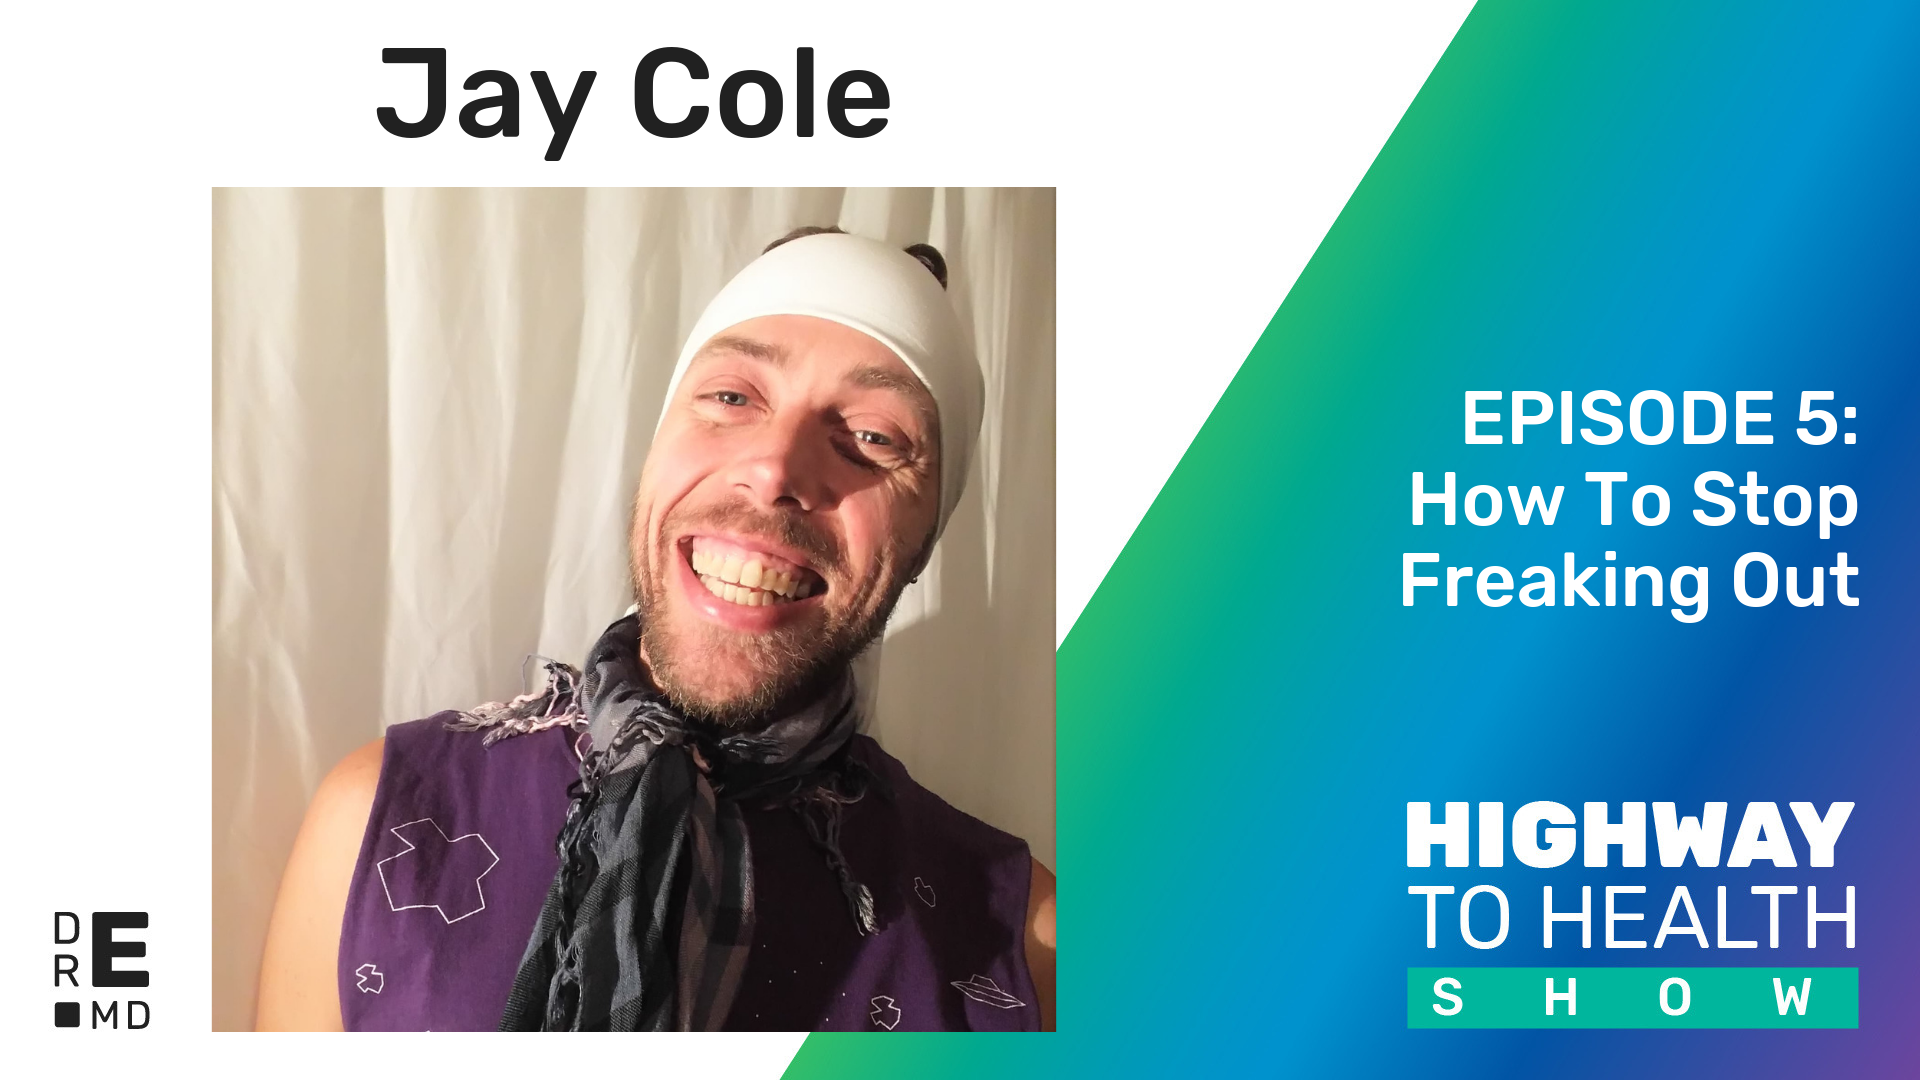 Highway to Health: Ep 05 - Jay Cole